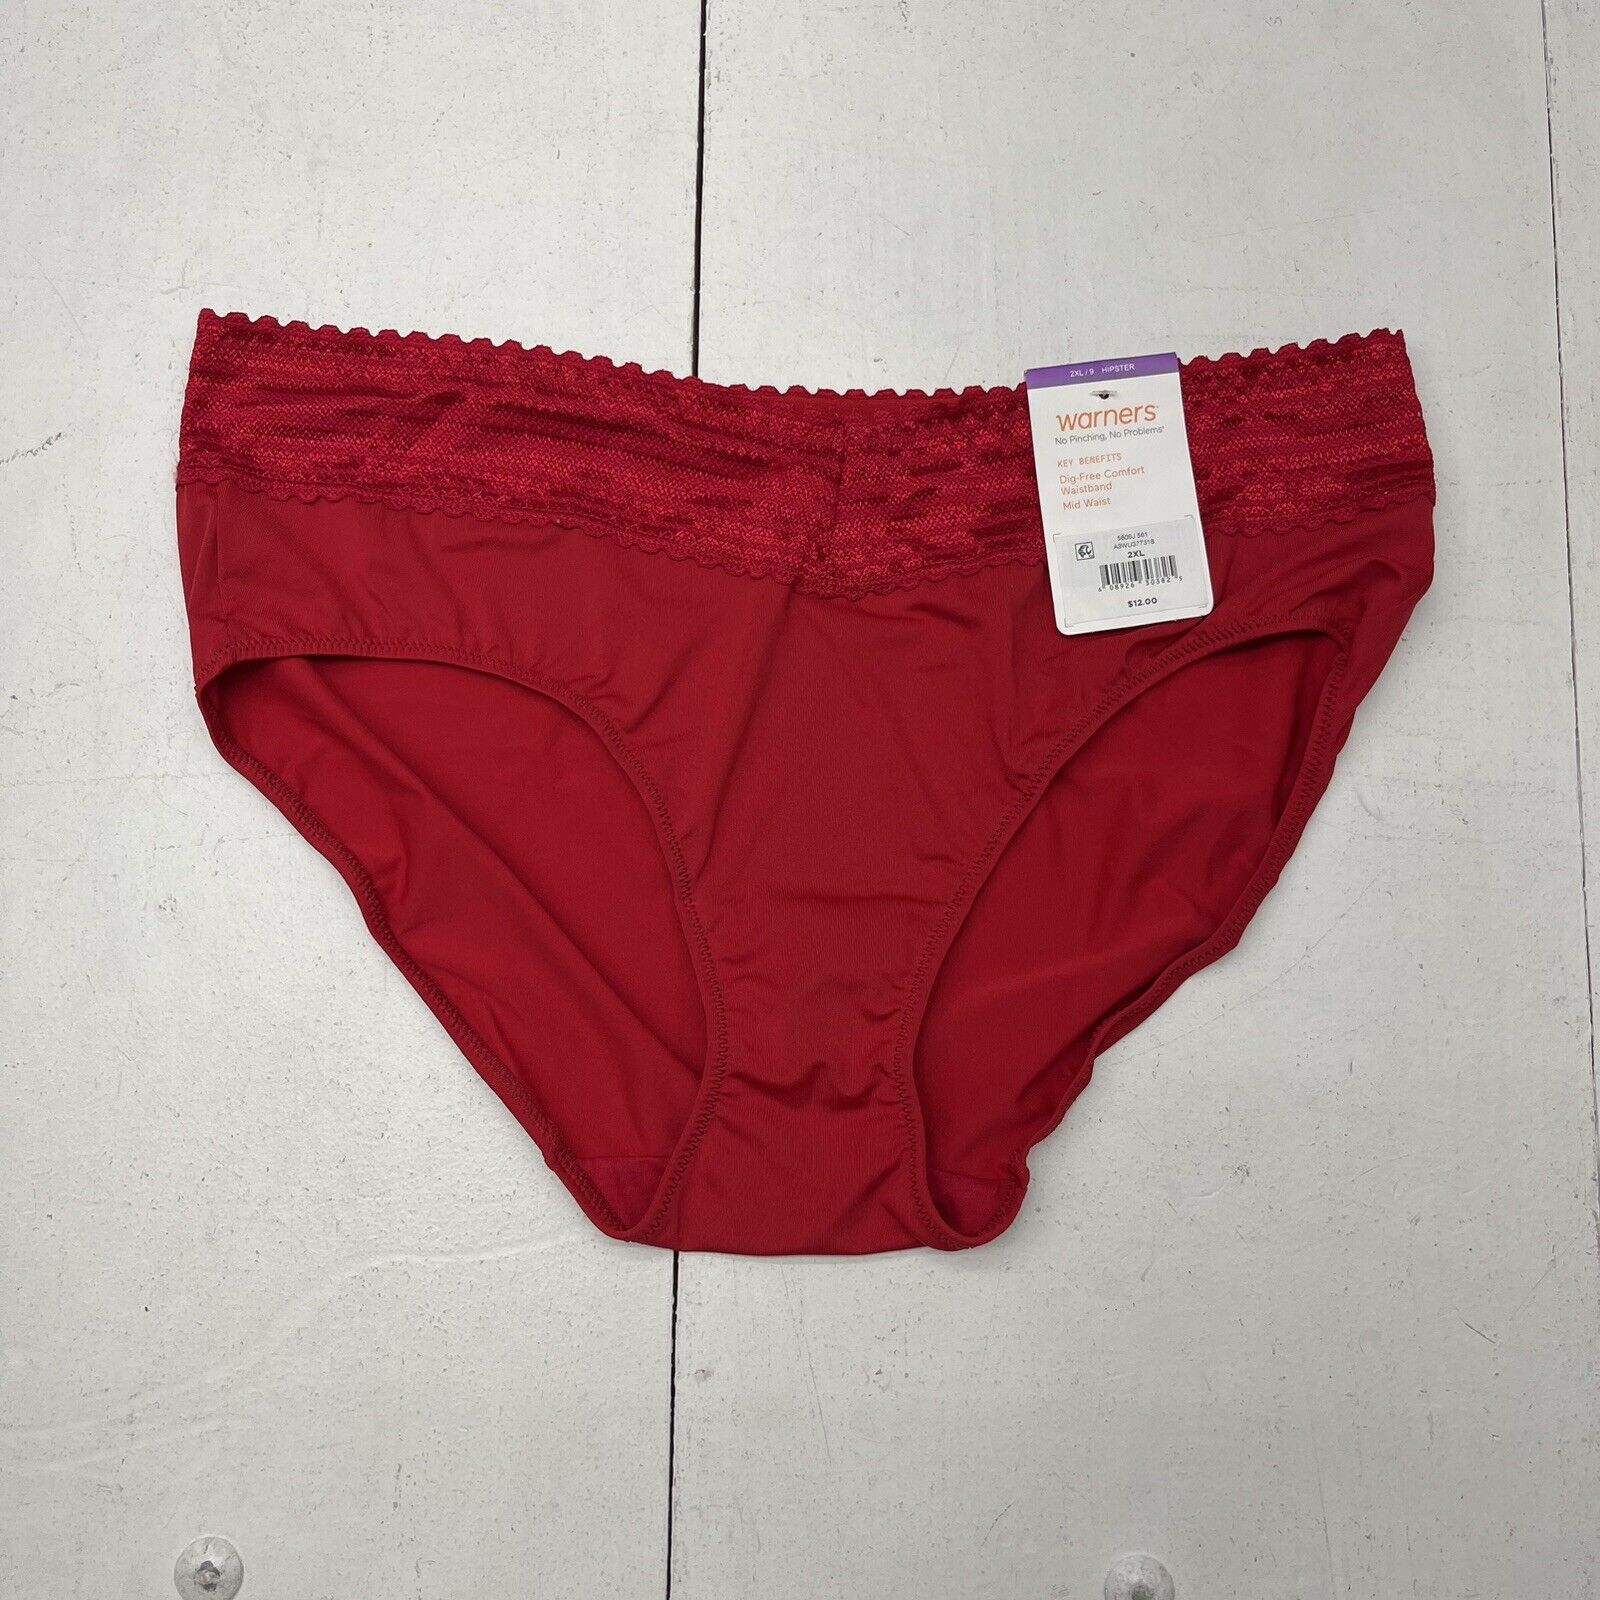 Warners Red Hipster Panties Women’s Size 2XL NEW